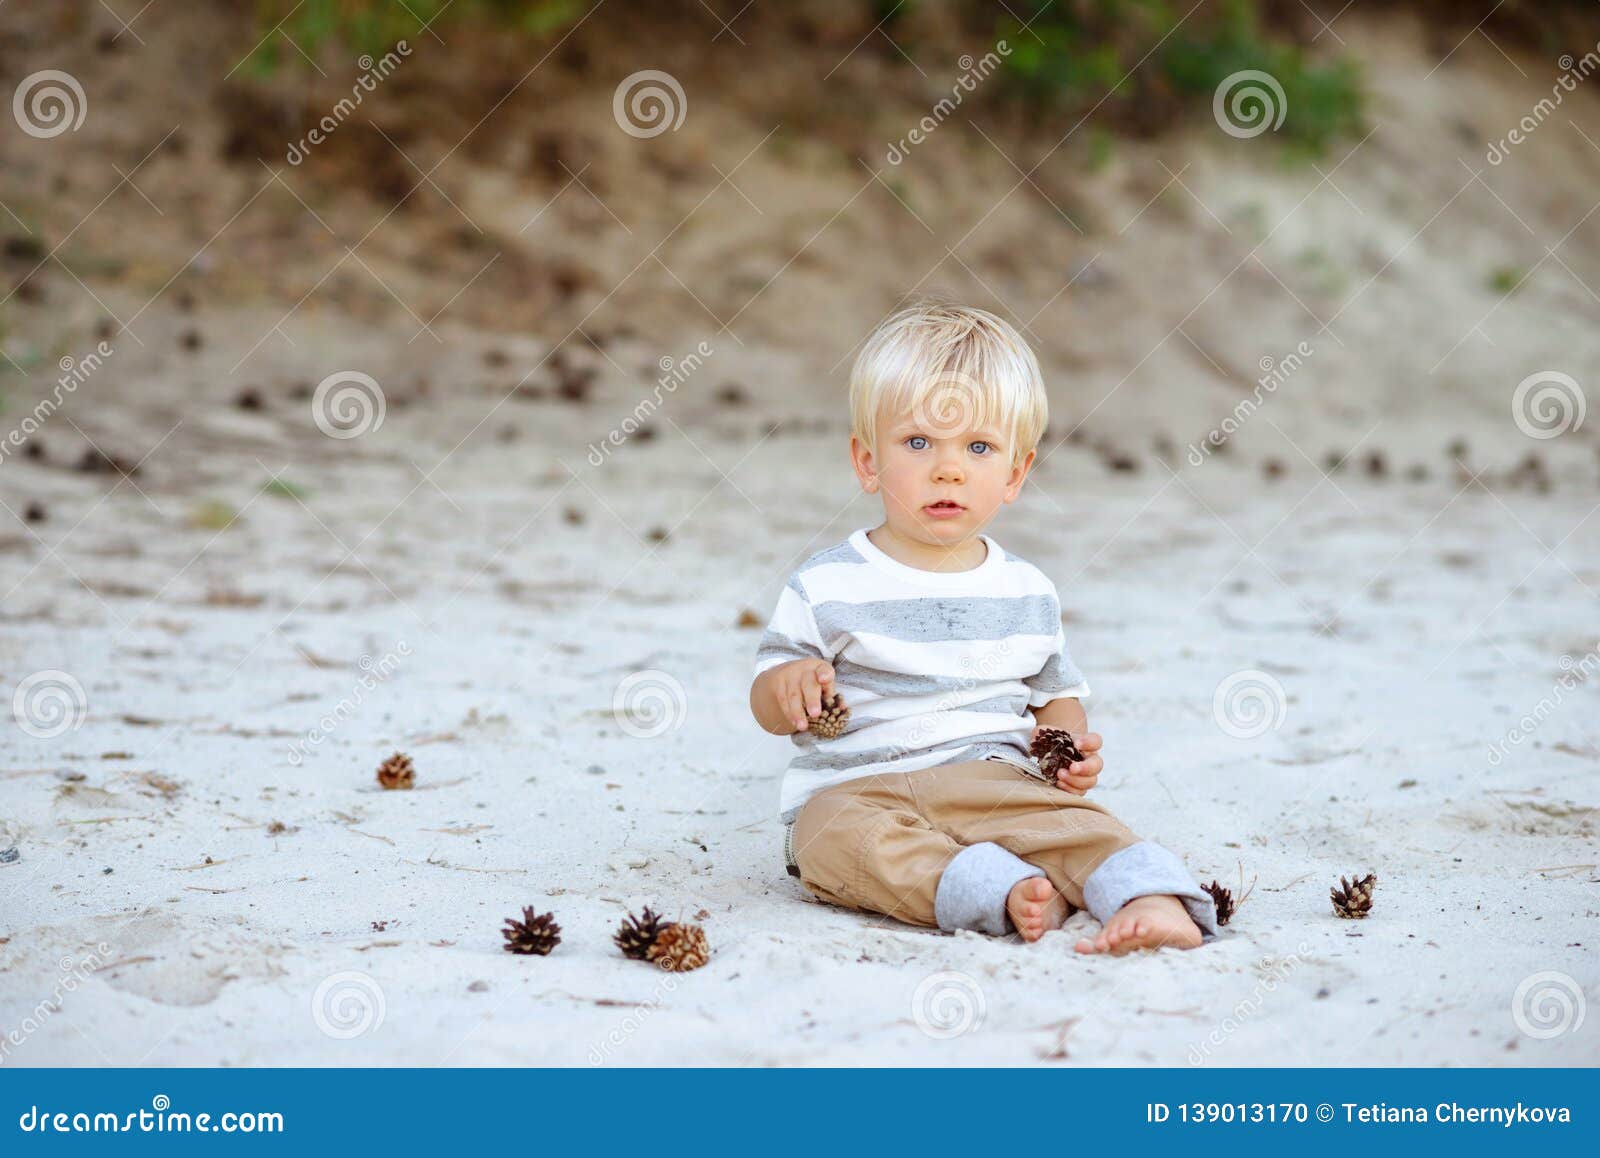 Cute Boy With Blond Hair And Blue Eyes Stock Photo Image Of